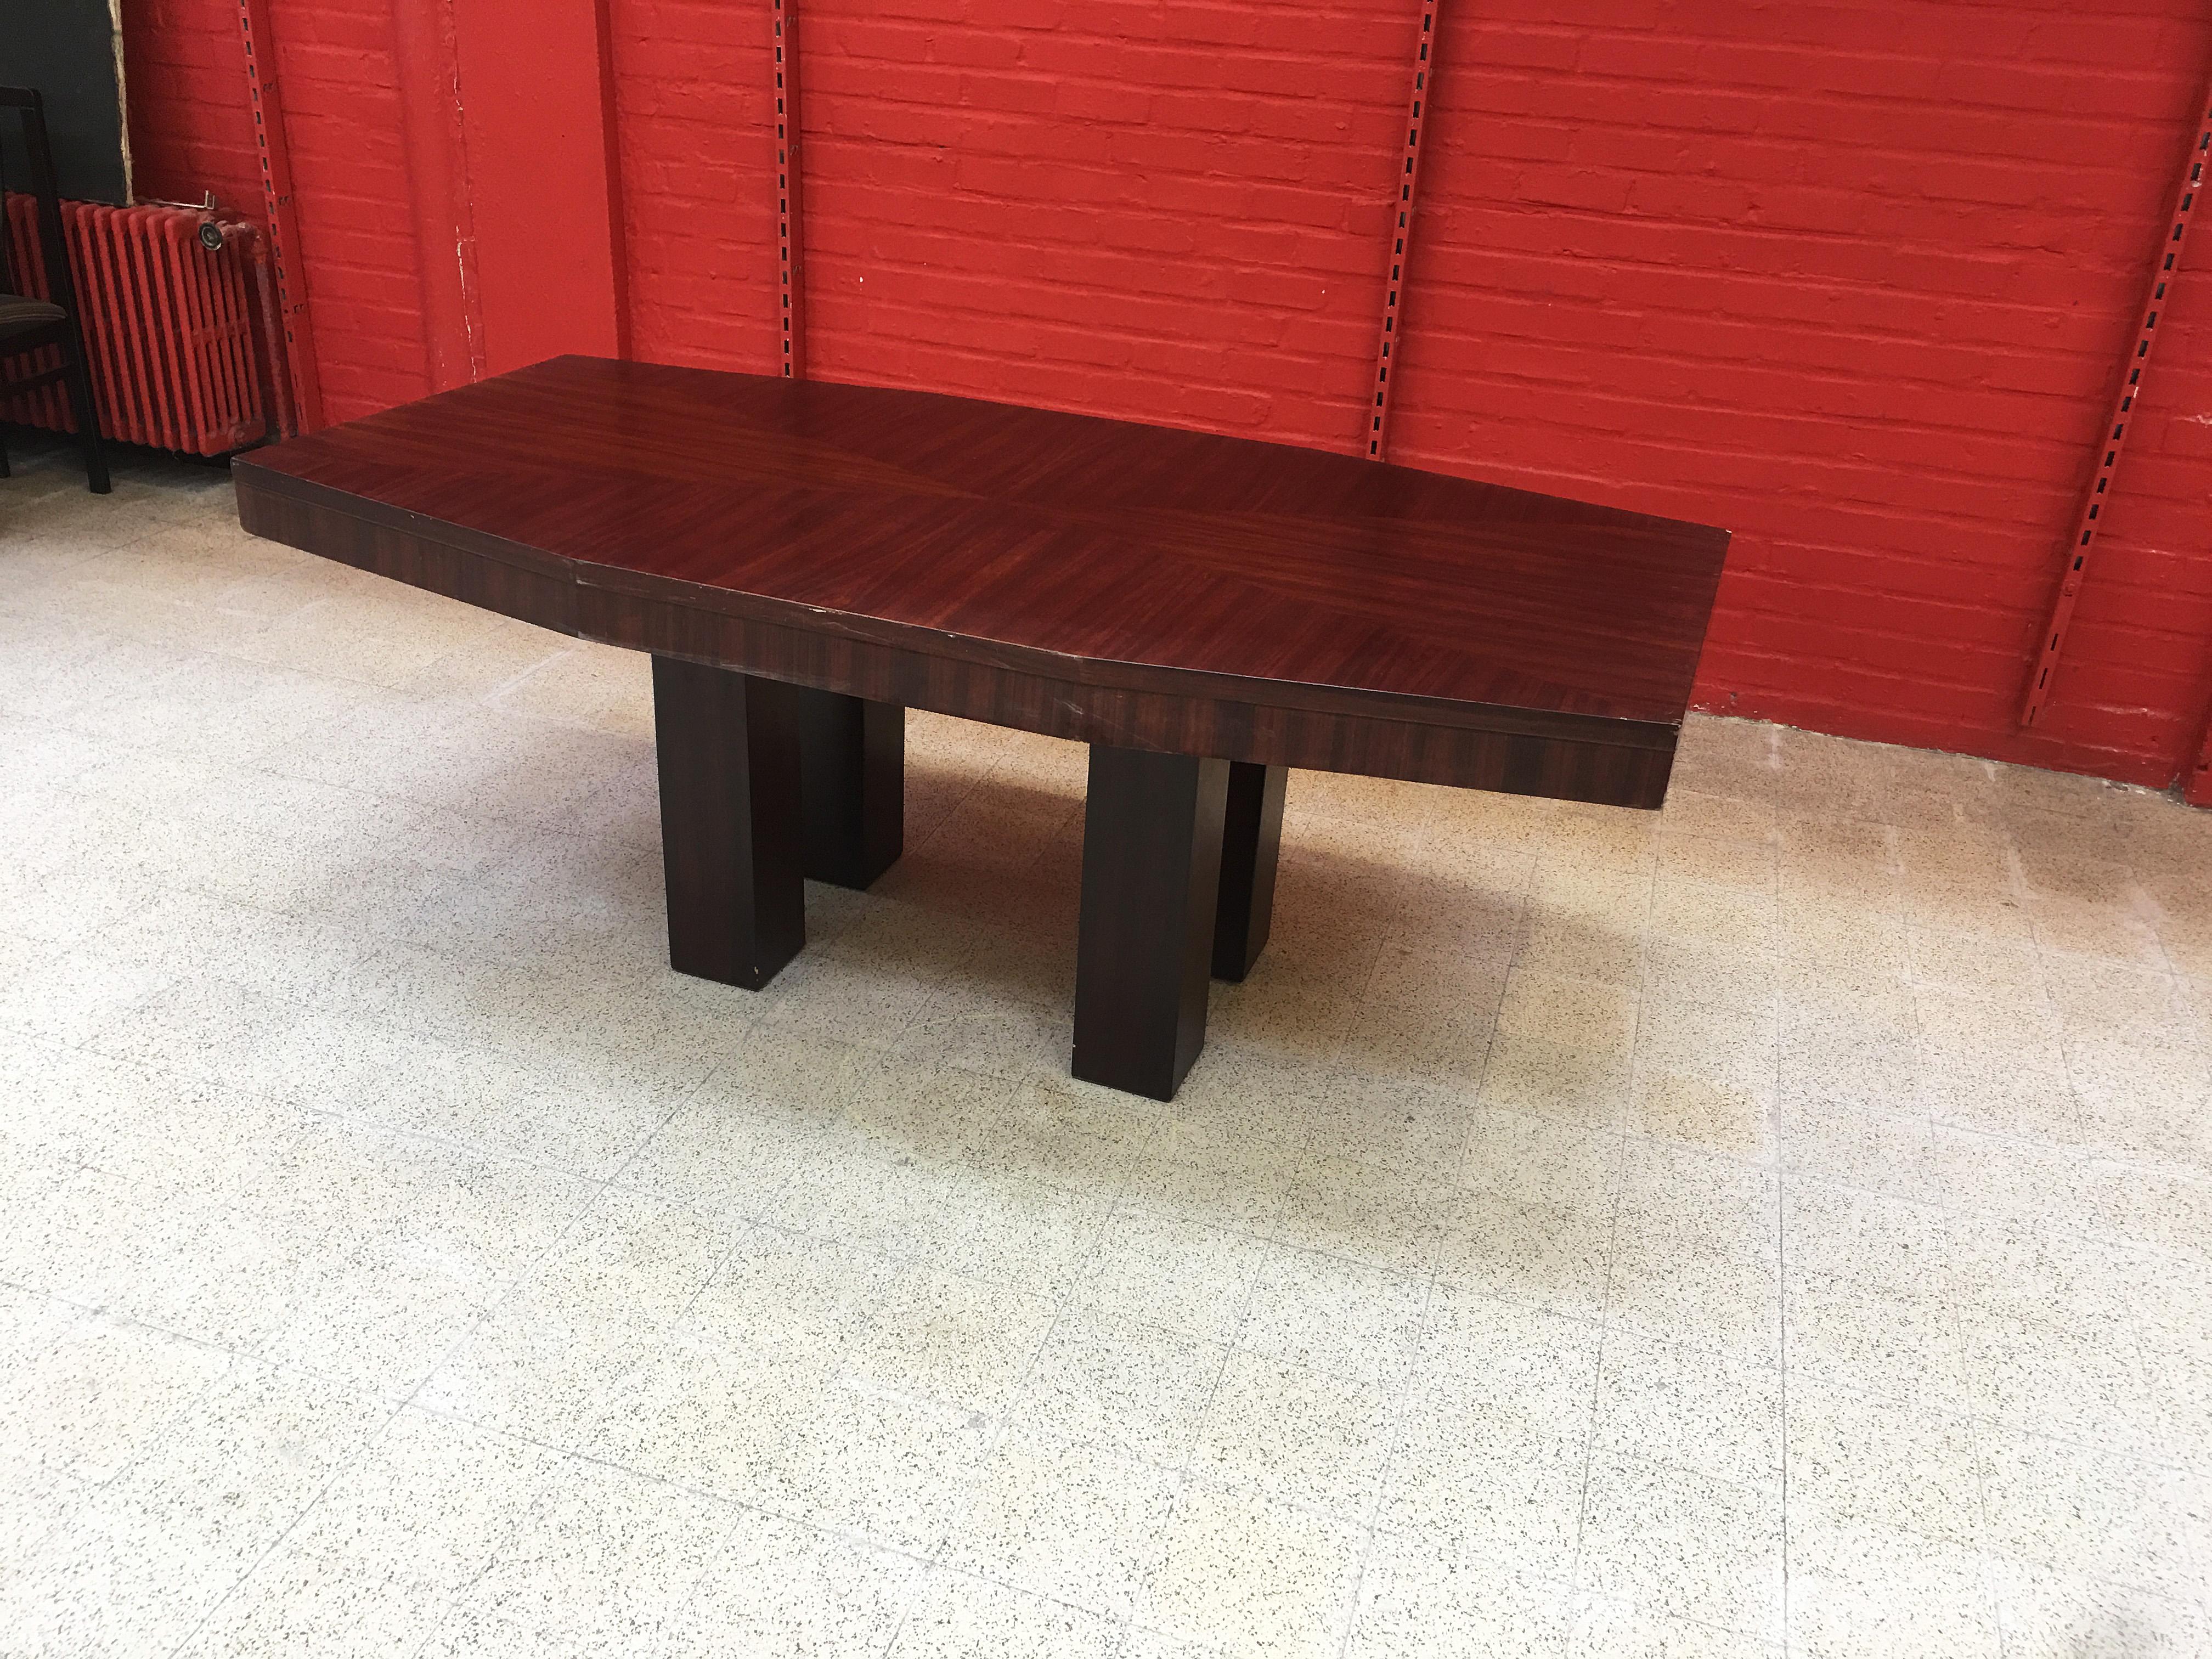 Mid-20th Century Modernist Art Deco Table circa 1930-1940 Attributed to Jacques Adnet For Sale